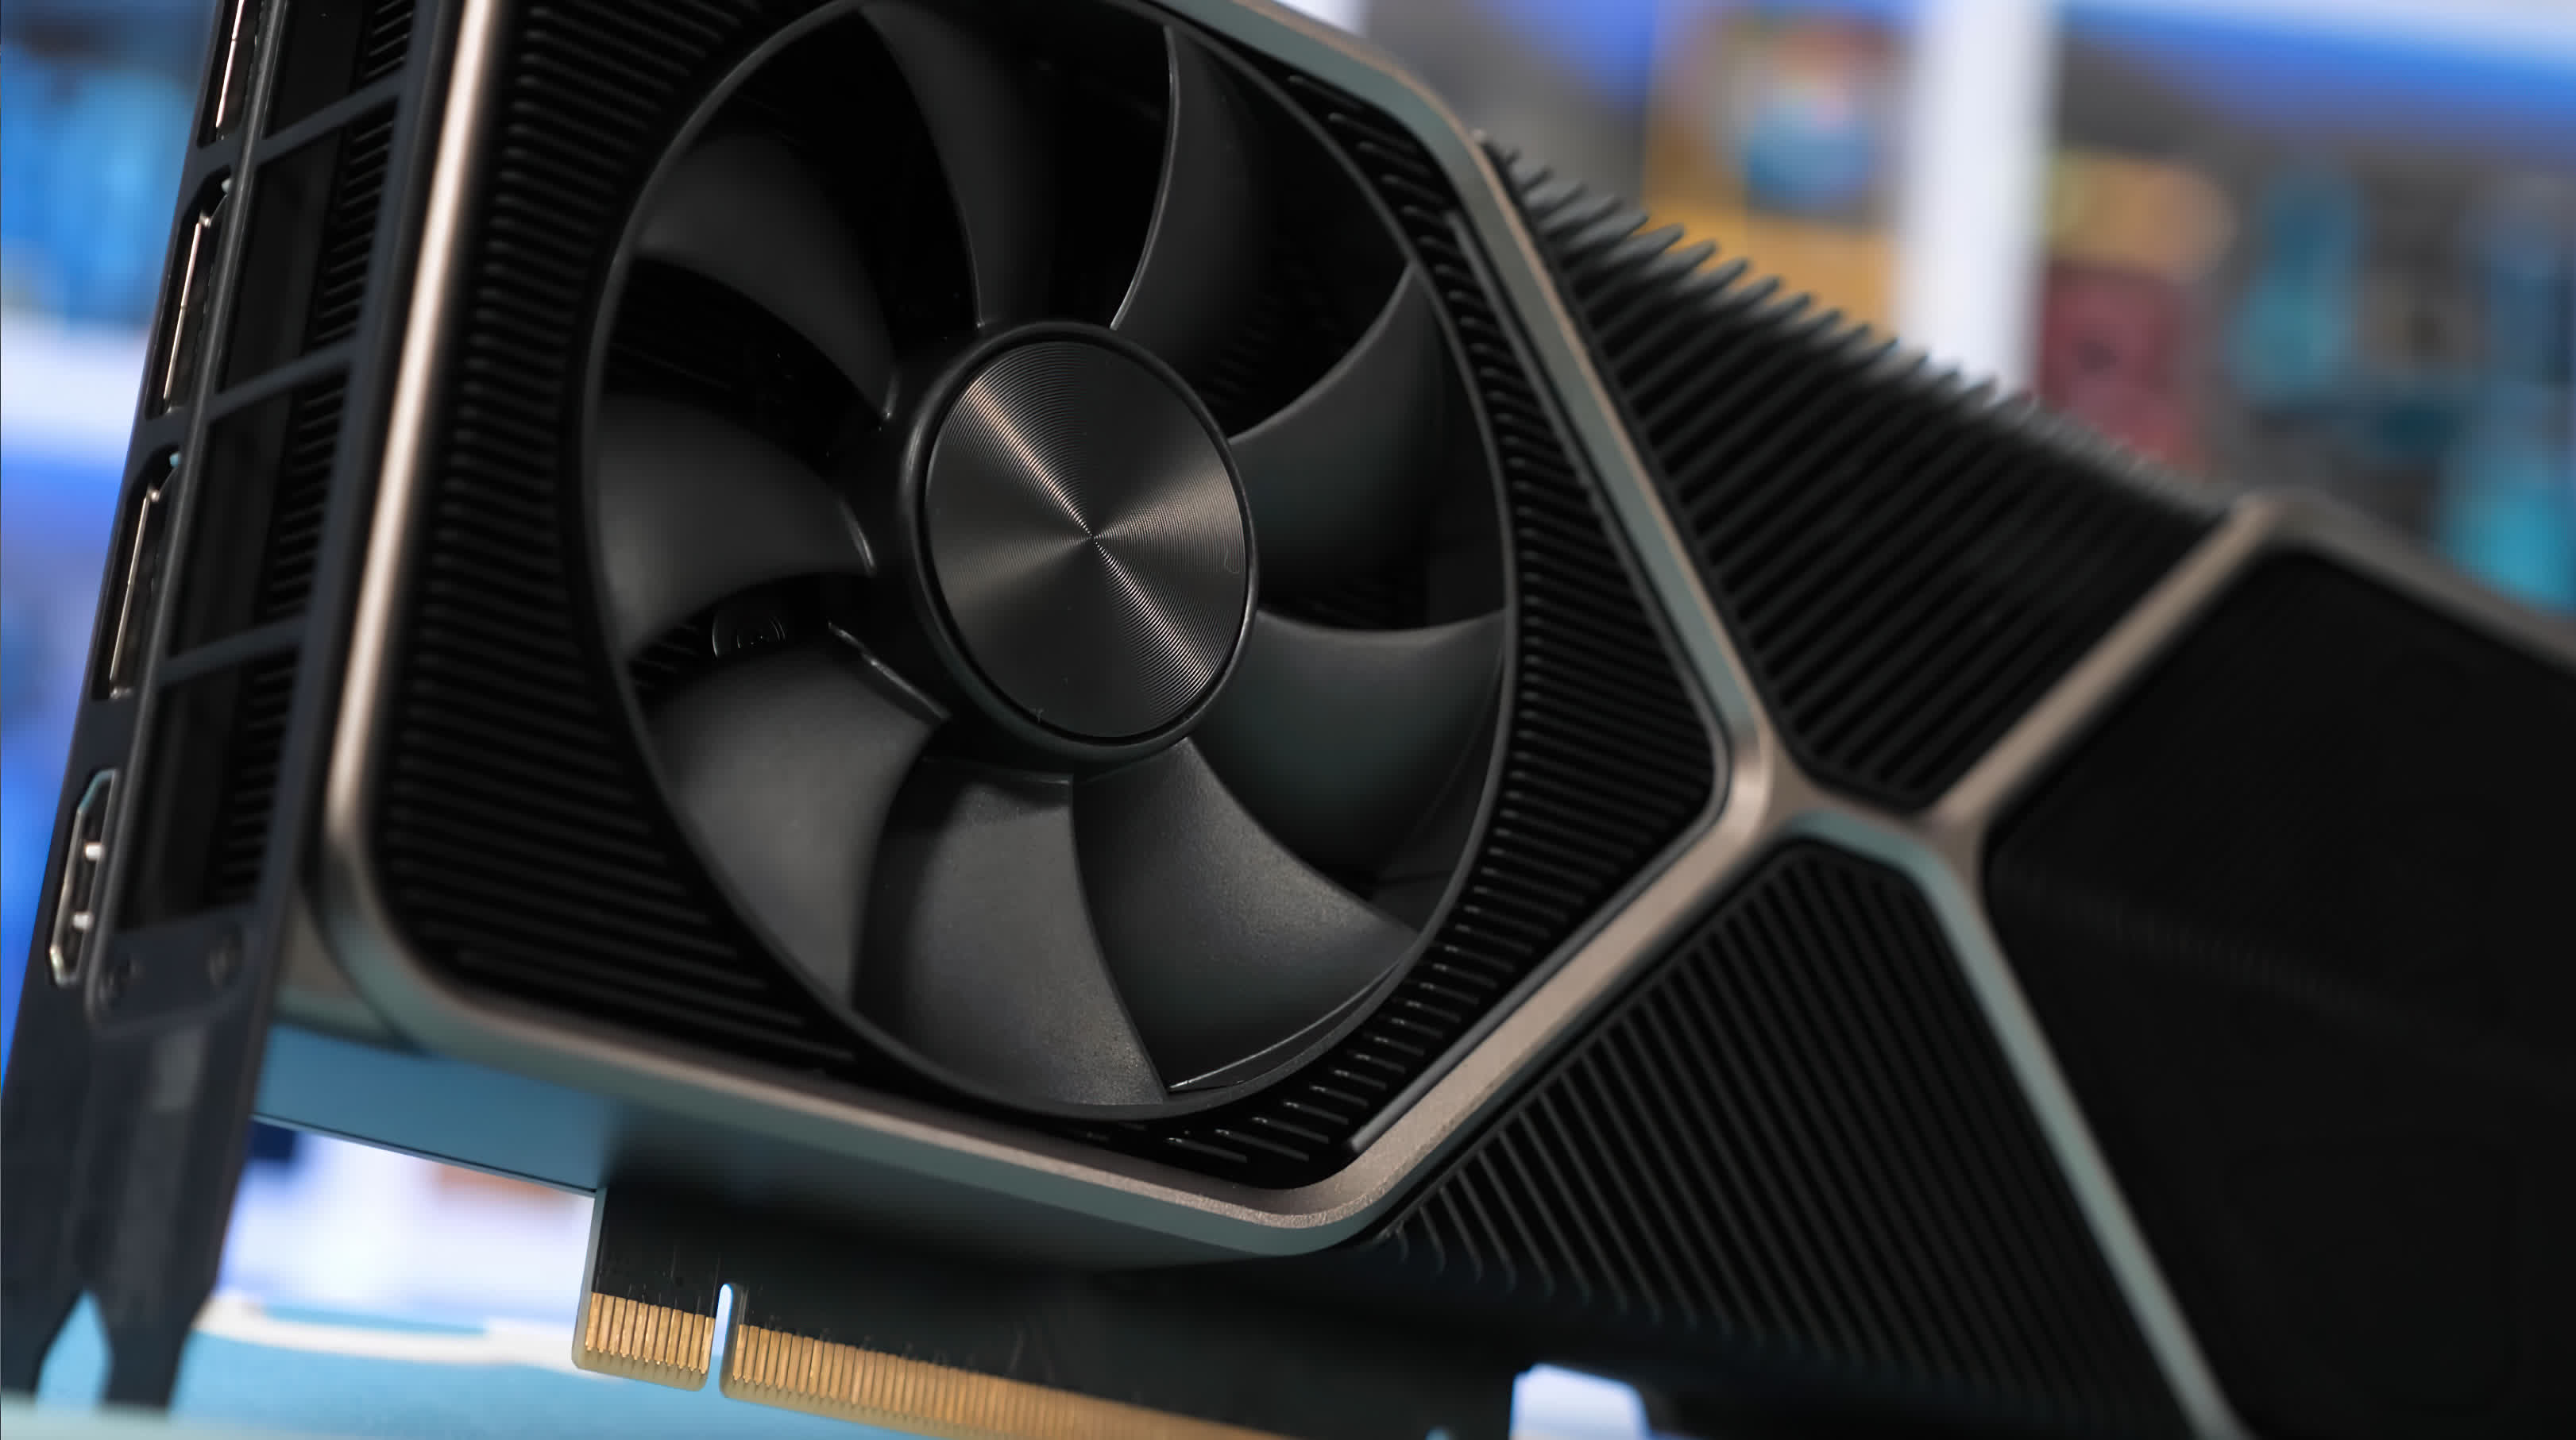 Asus accidentally confirms GeForce RTX 3080 Ti with 20 GB of memory